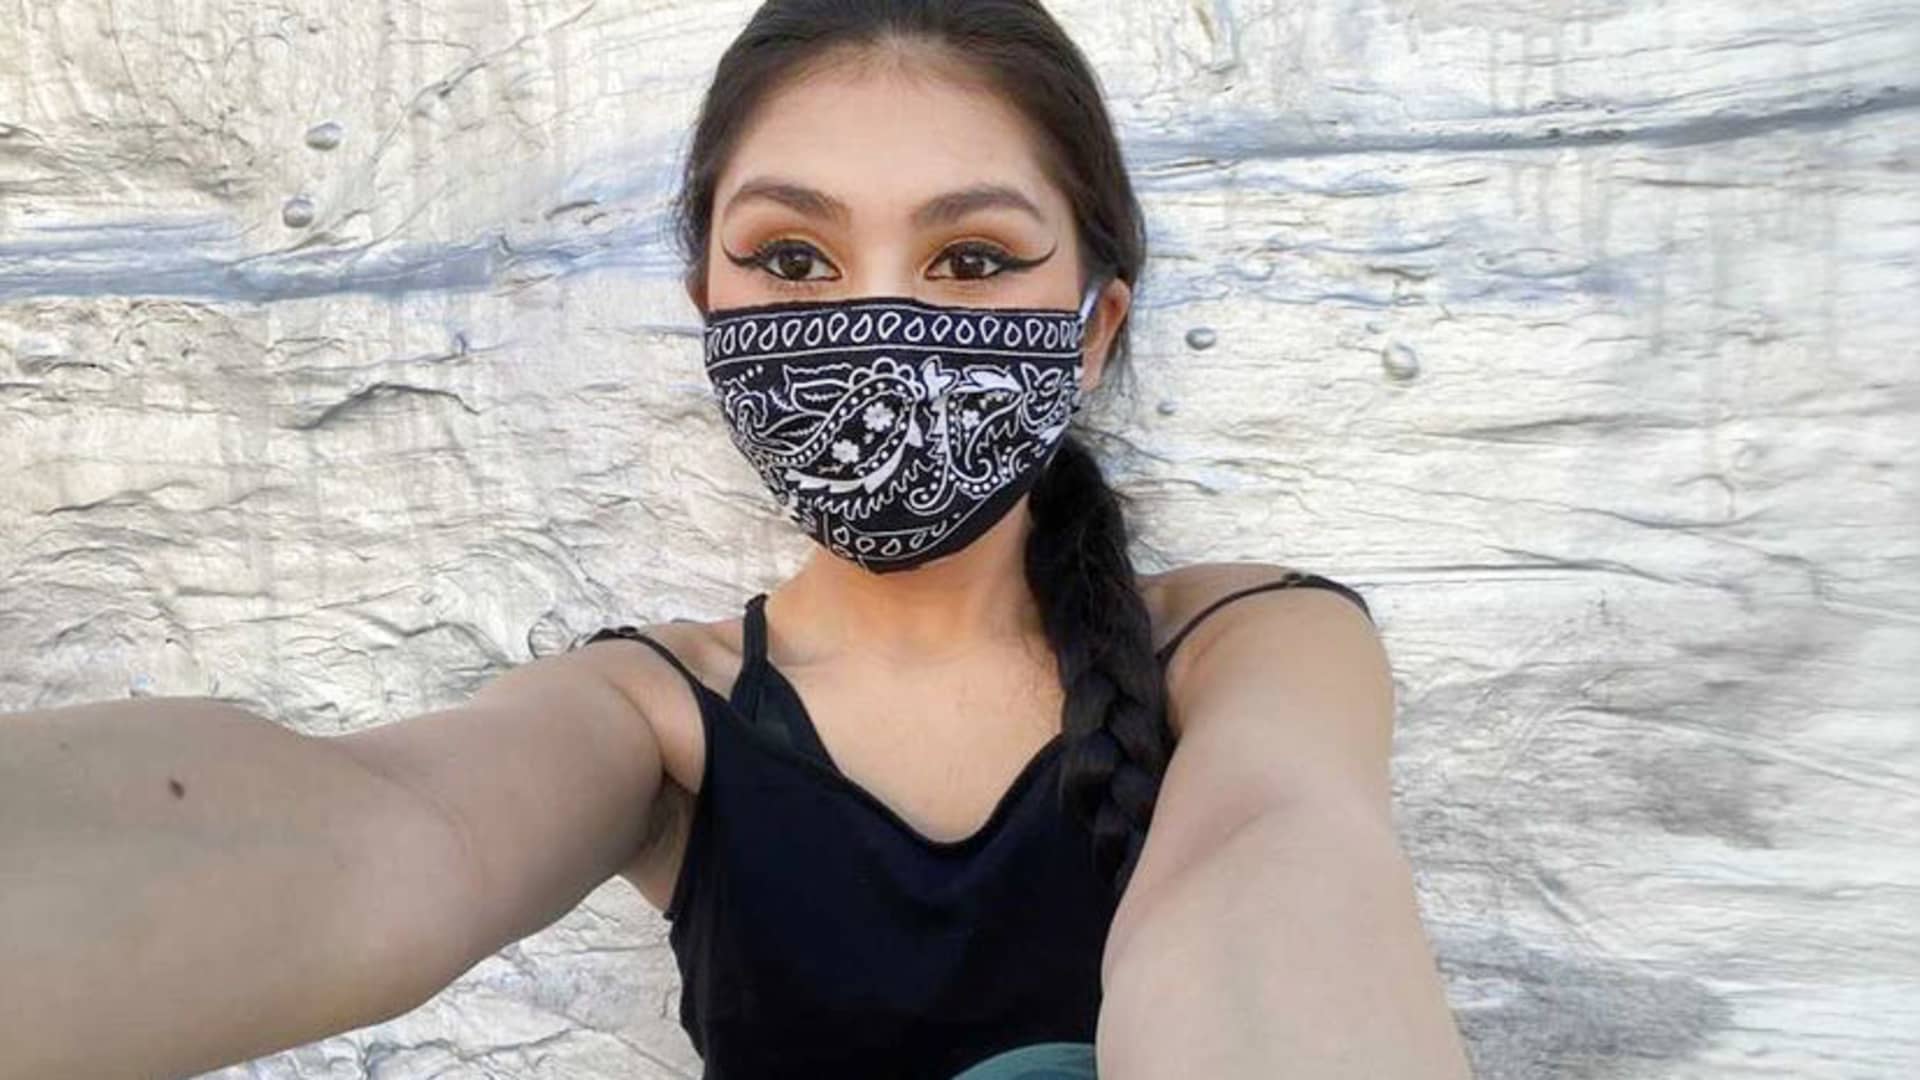 Jacqueline Cabrera, a recent graduate from the Fashion Institute of Technology, sold face masks during the pandemic using her skill in fashion design.